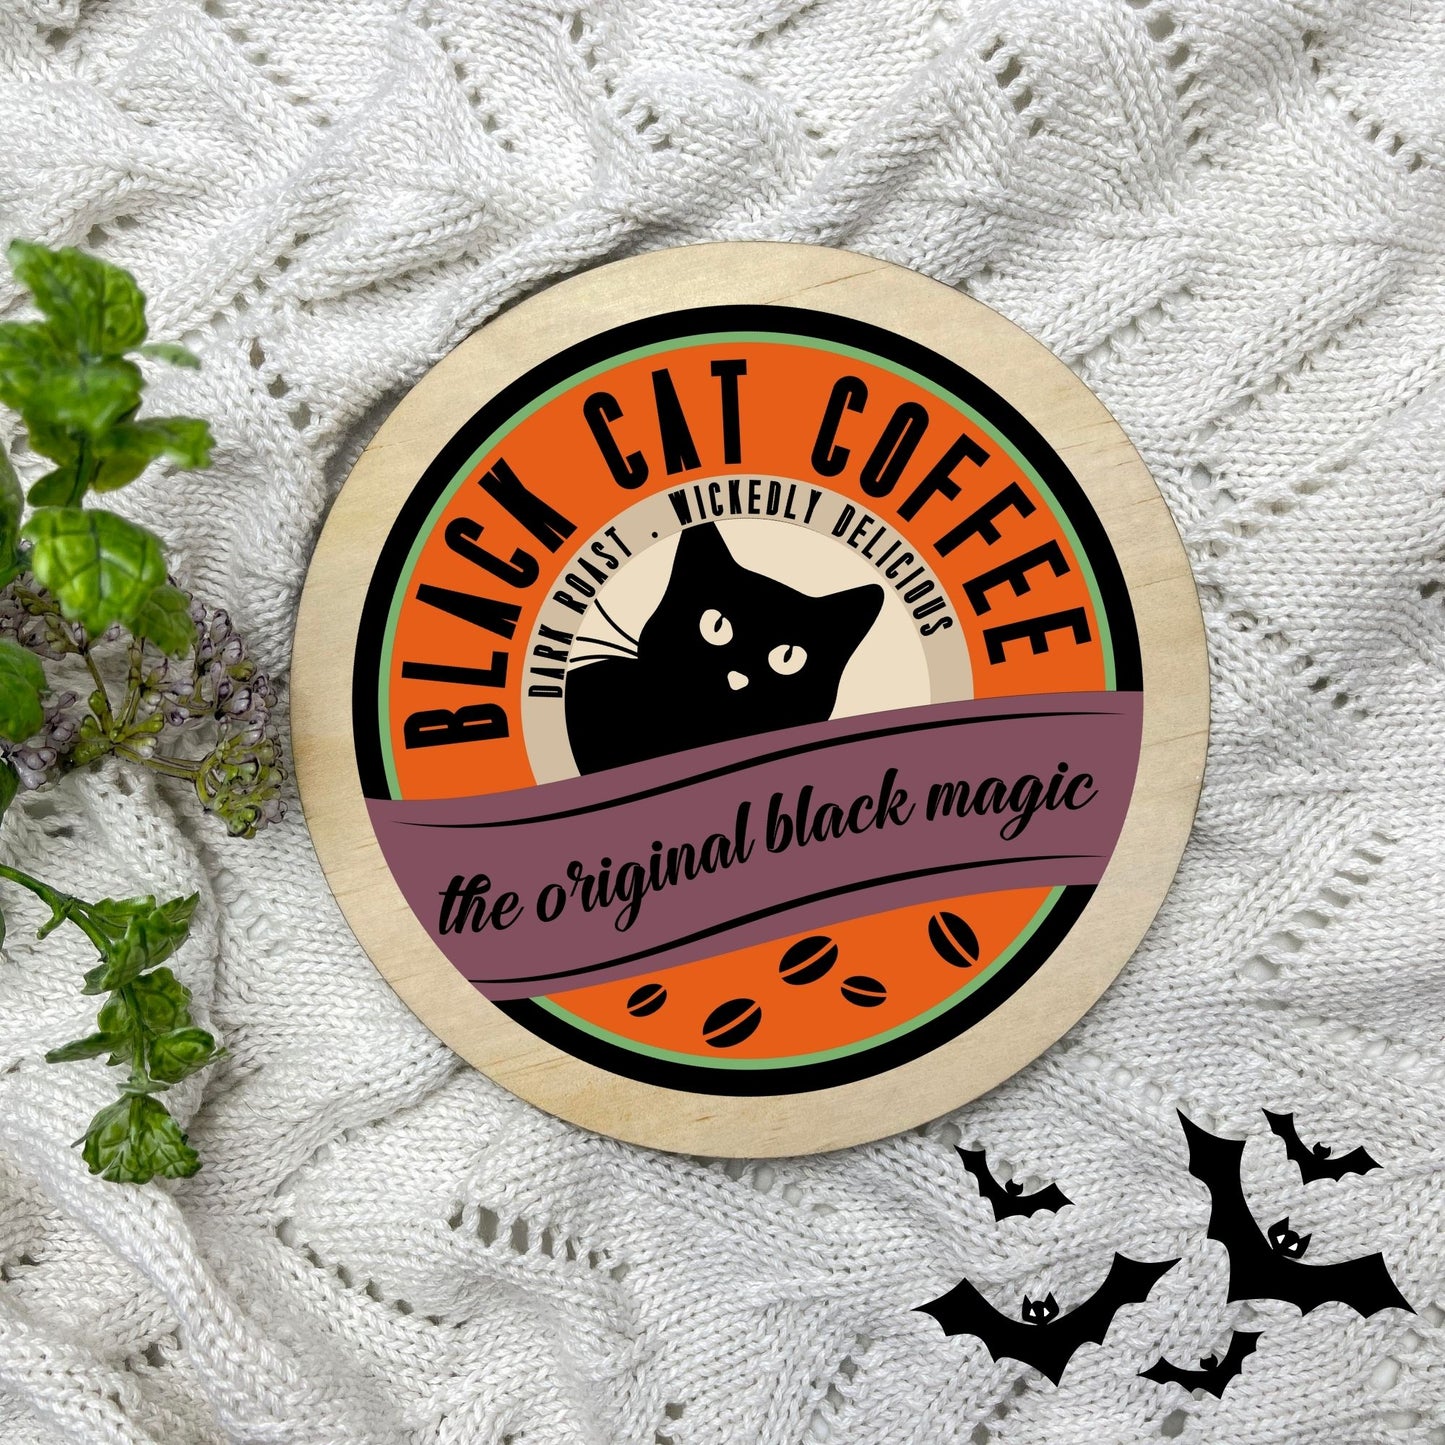 Black cat coffee sign, Halloween Decor, Spooky Vibes, hocus pocus sign, trick or treat decor, haunted house h20